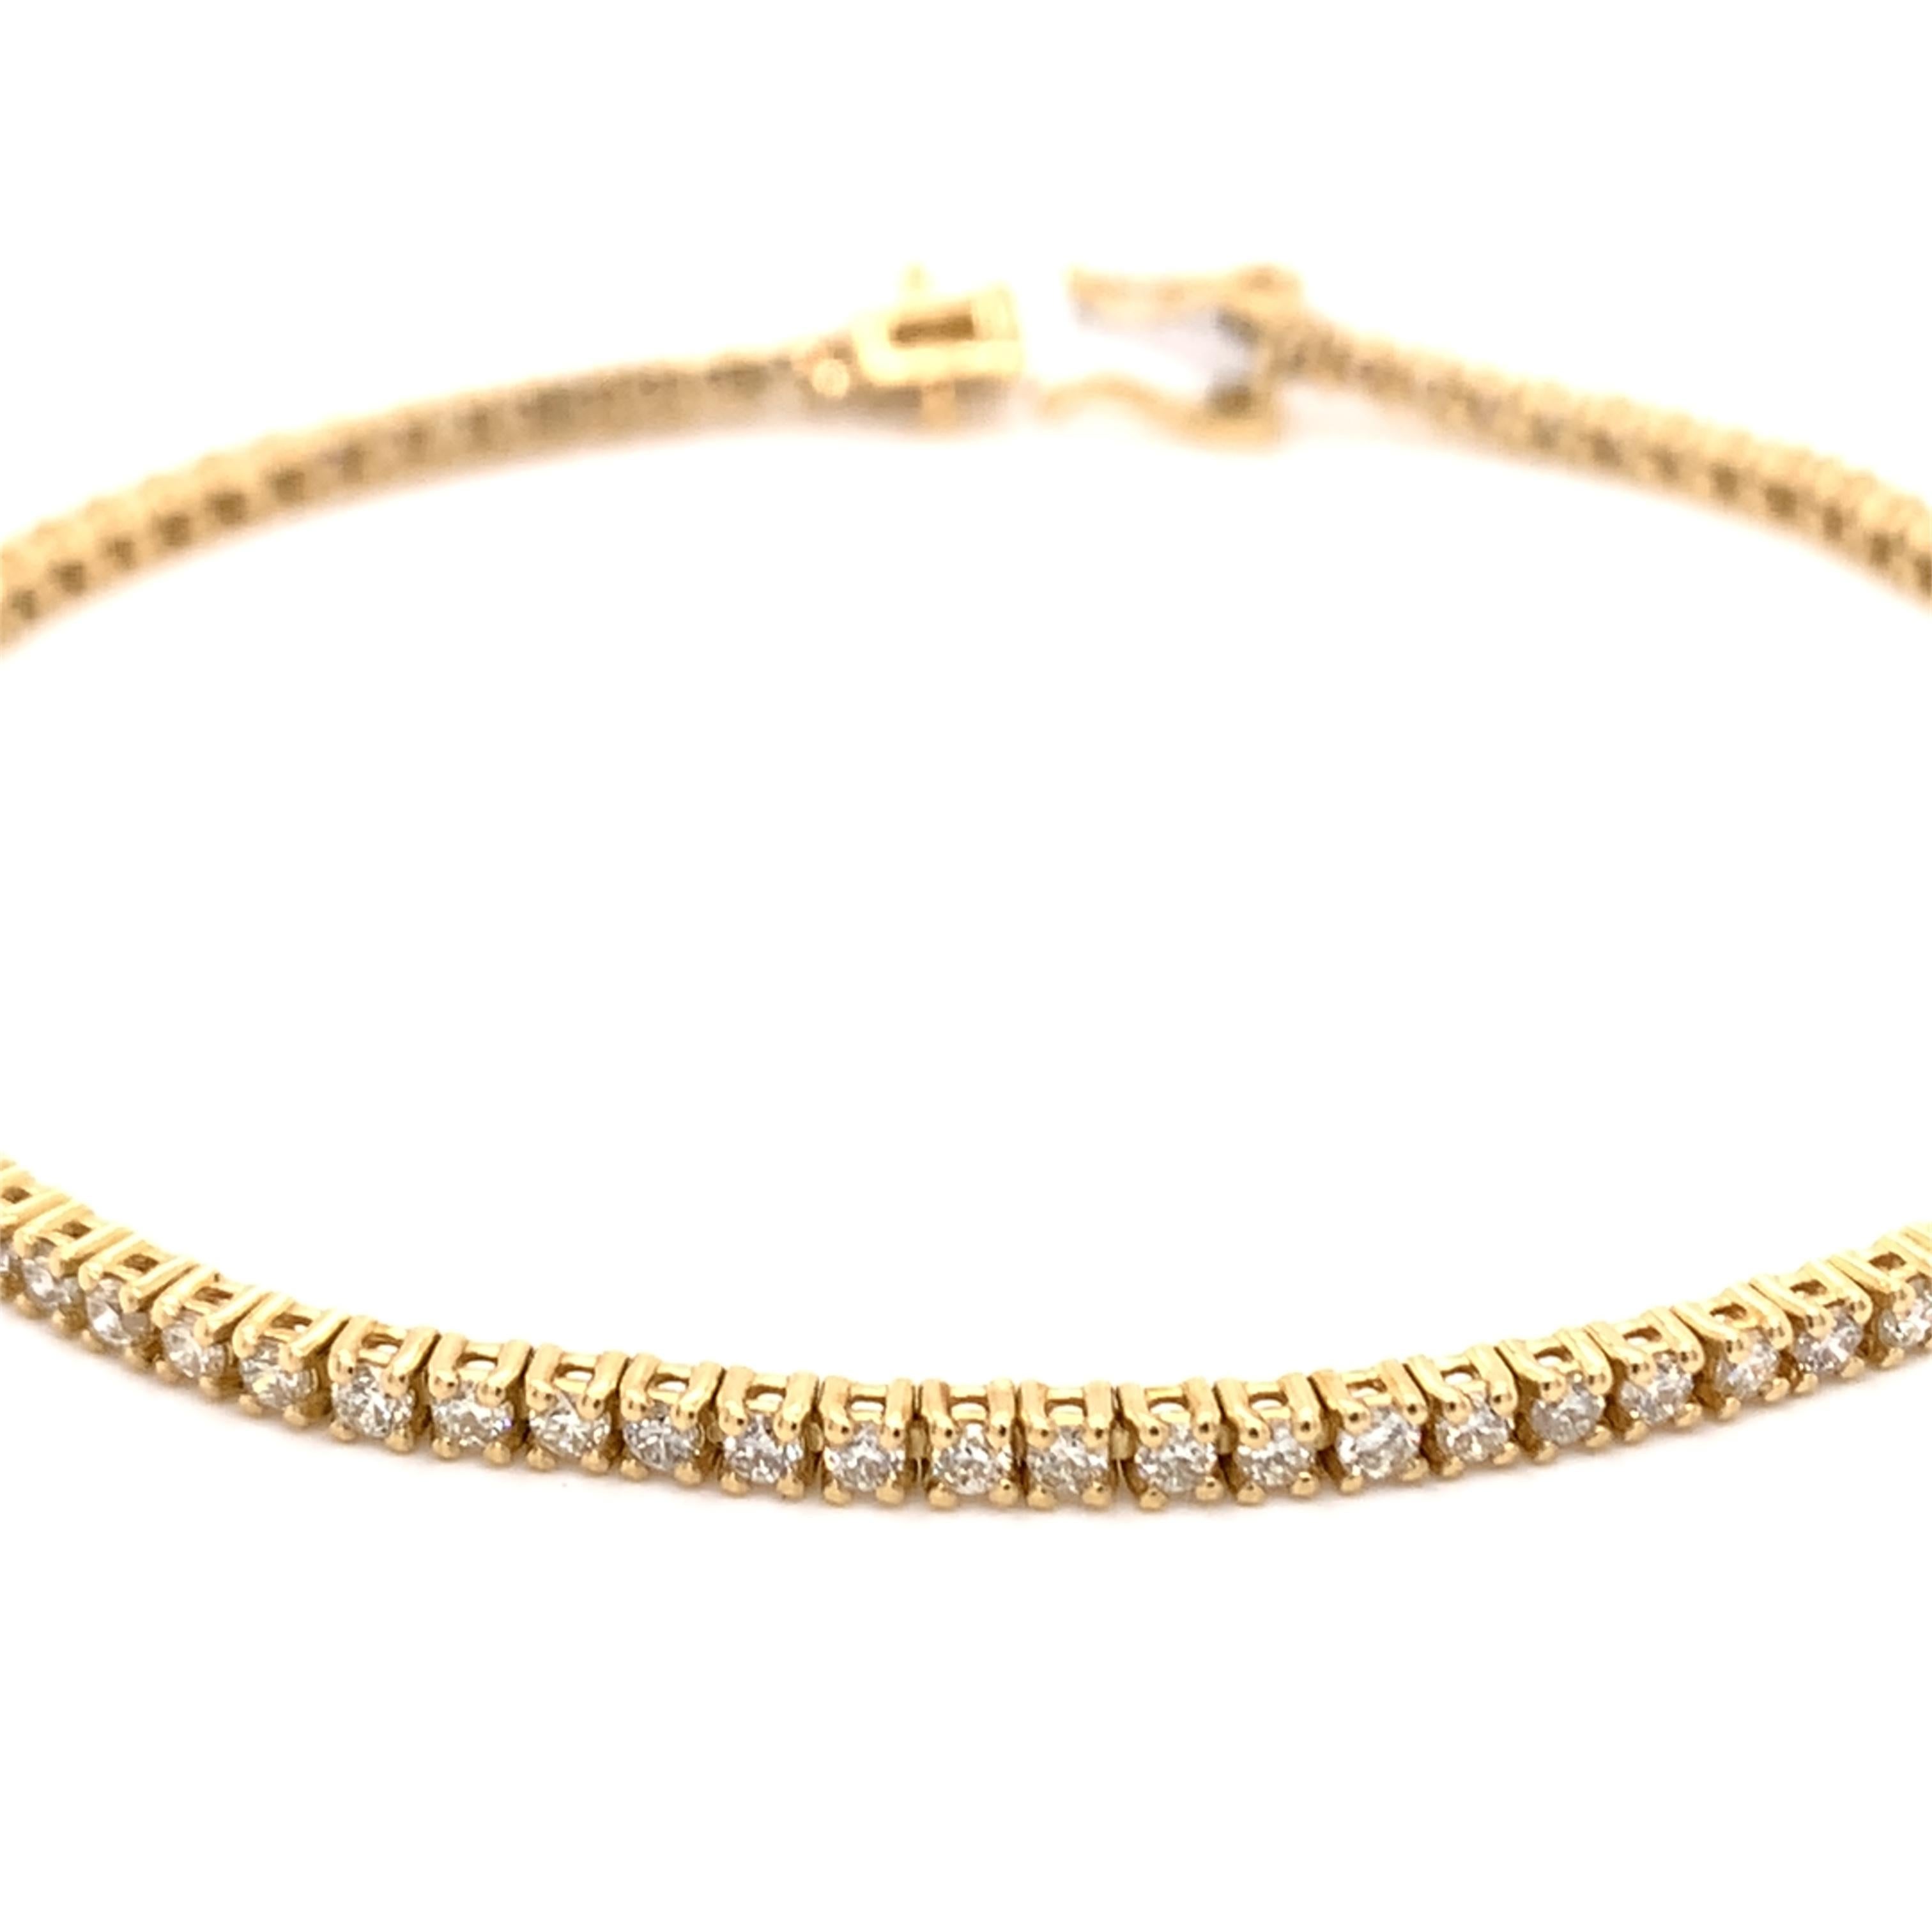 Thin diamond tennis bracelet made with real/natural brilliant cut diamonds. Total Diamond Weight: 1.53 carats. Diamond Quantity: 86 (round diamonds). Color: G. Clarity: SI. Mounted on 18kt yellow gold.